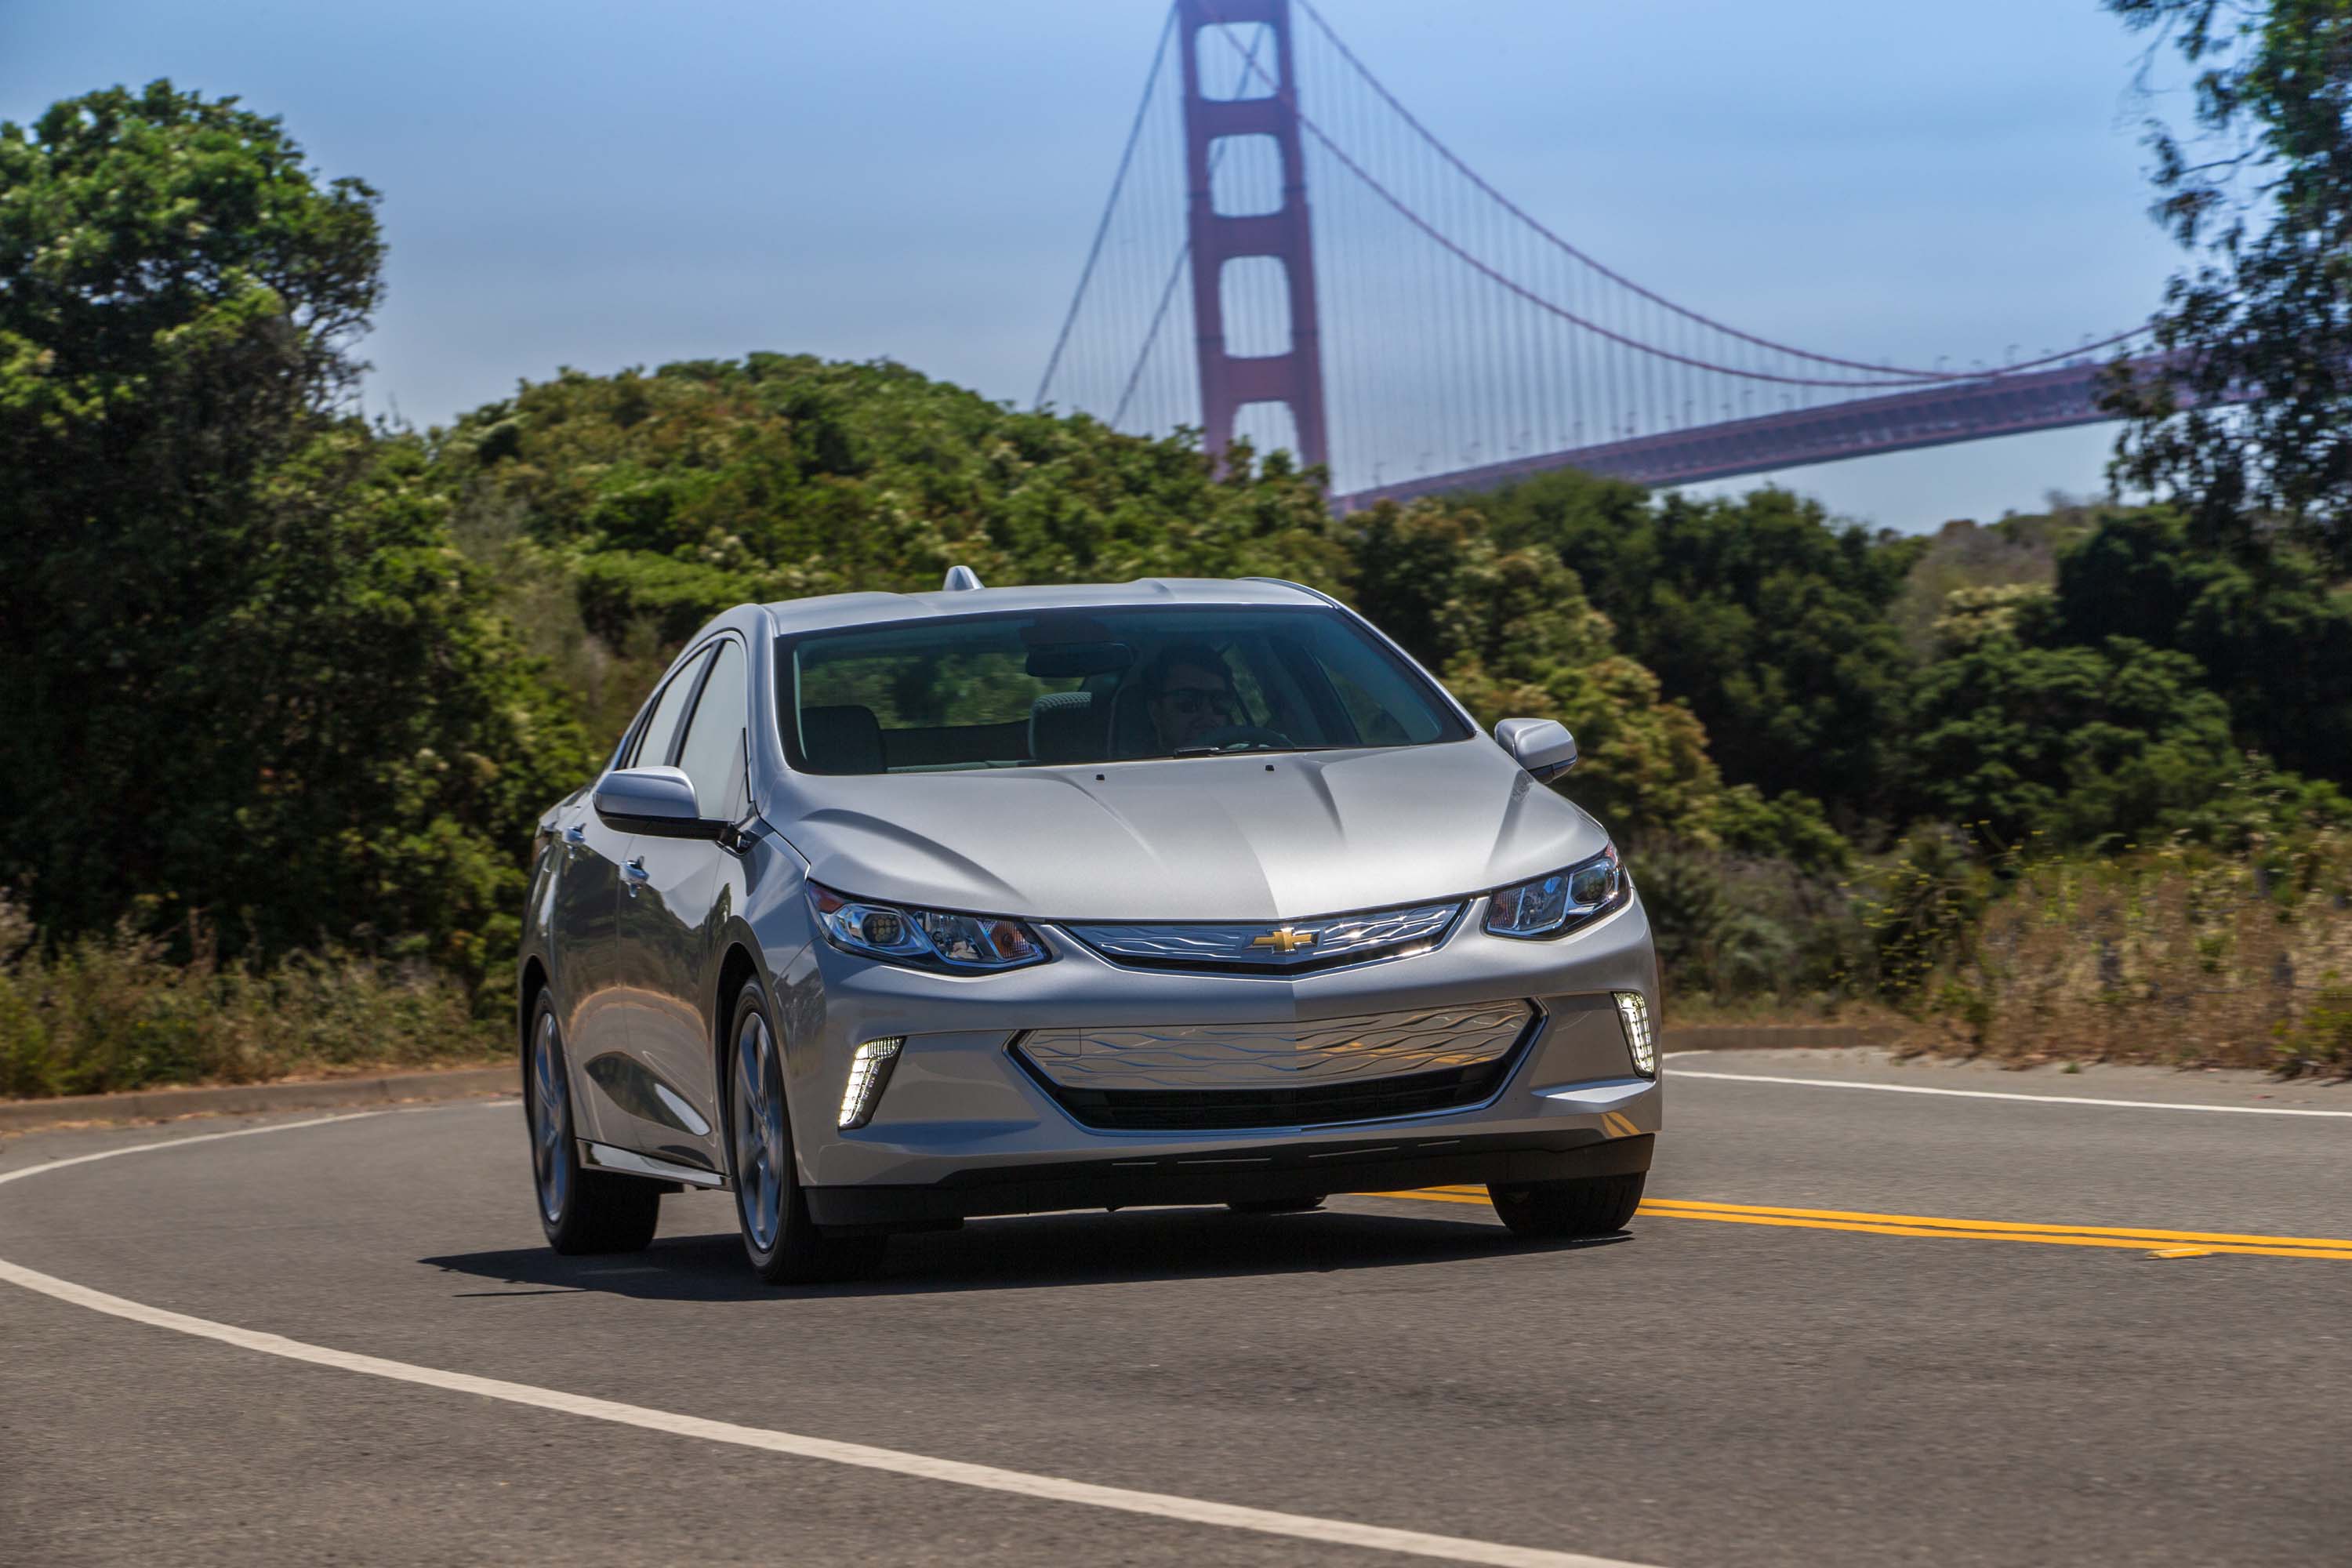 2019 Chevrolet Volt Review: Prices, Specs, and Photos - The Car Connection